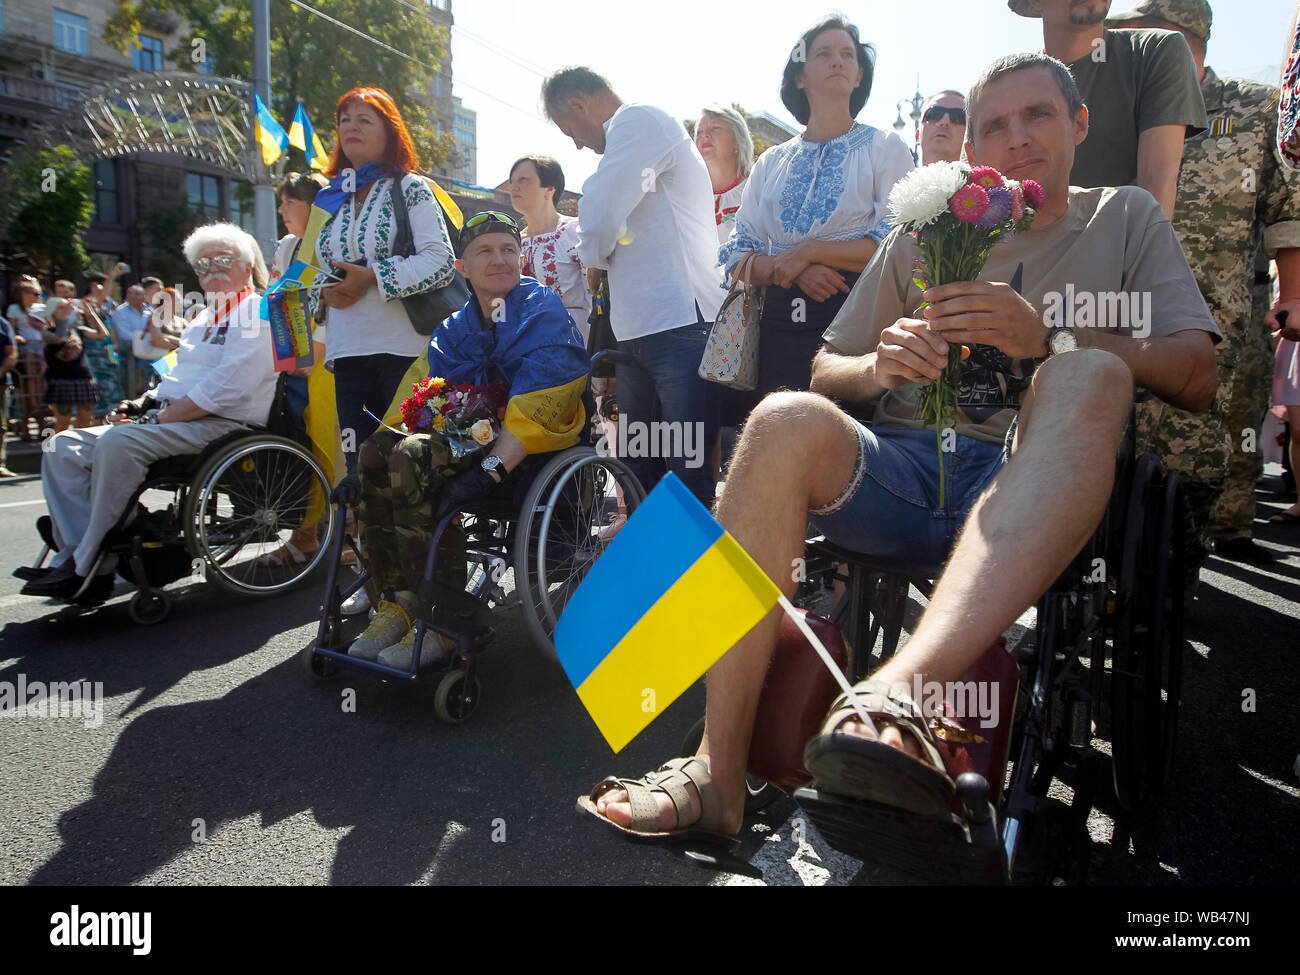 Ukrainian handicapped servicemen at the Independence Square during the Anniversary.Ukraine marks the 28th Independence Day Anniversary from the Soviet Union since 1991 on August 24, 2019. Stock Photo